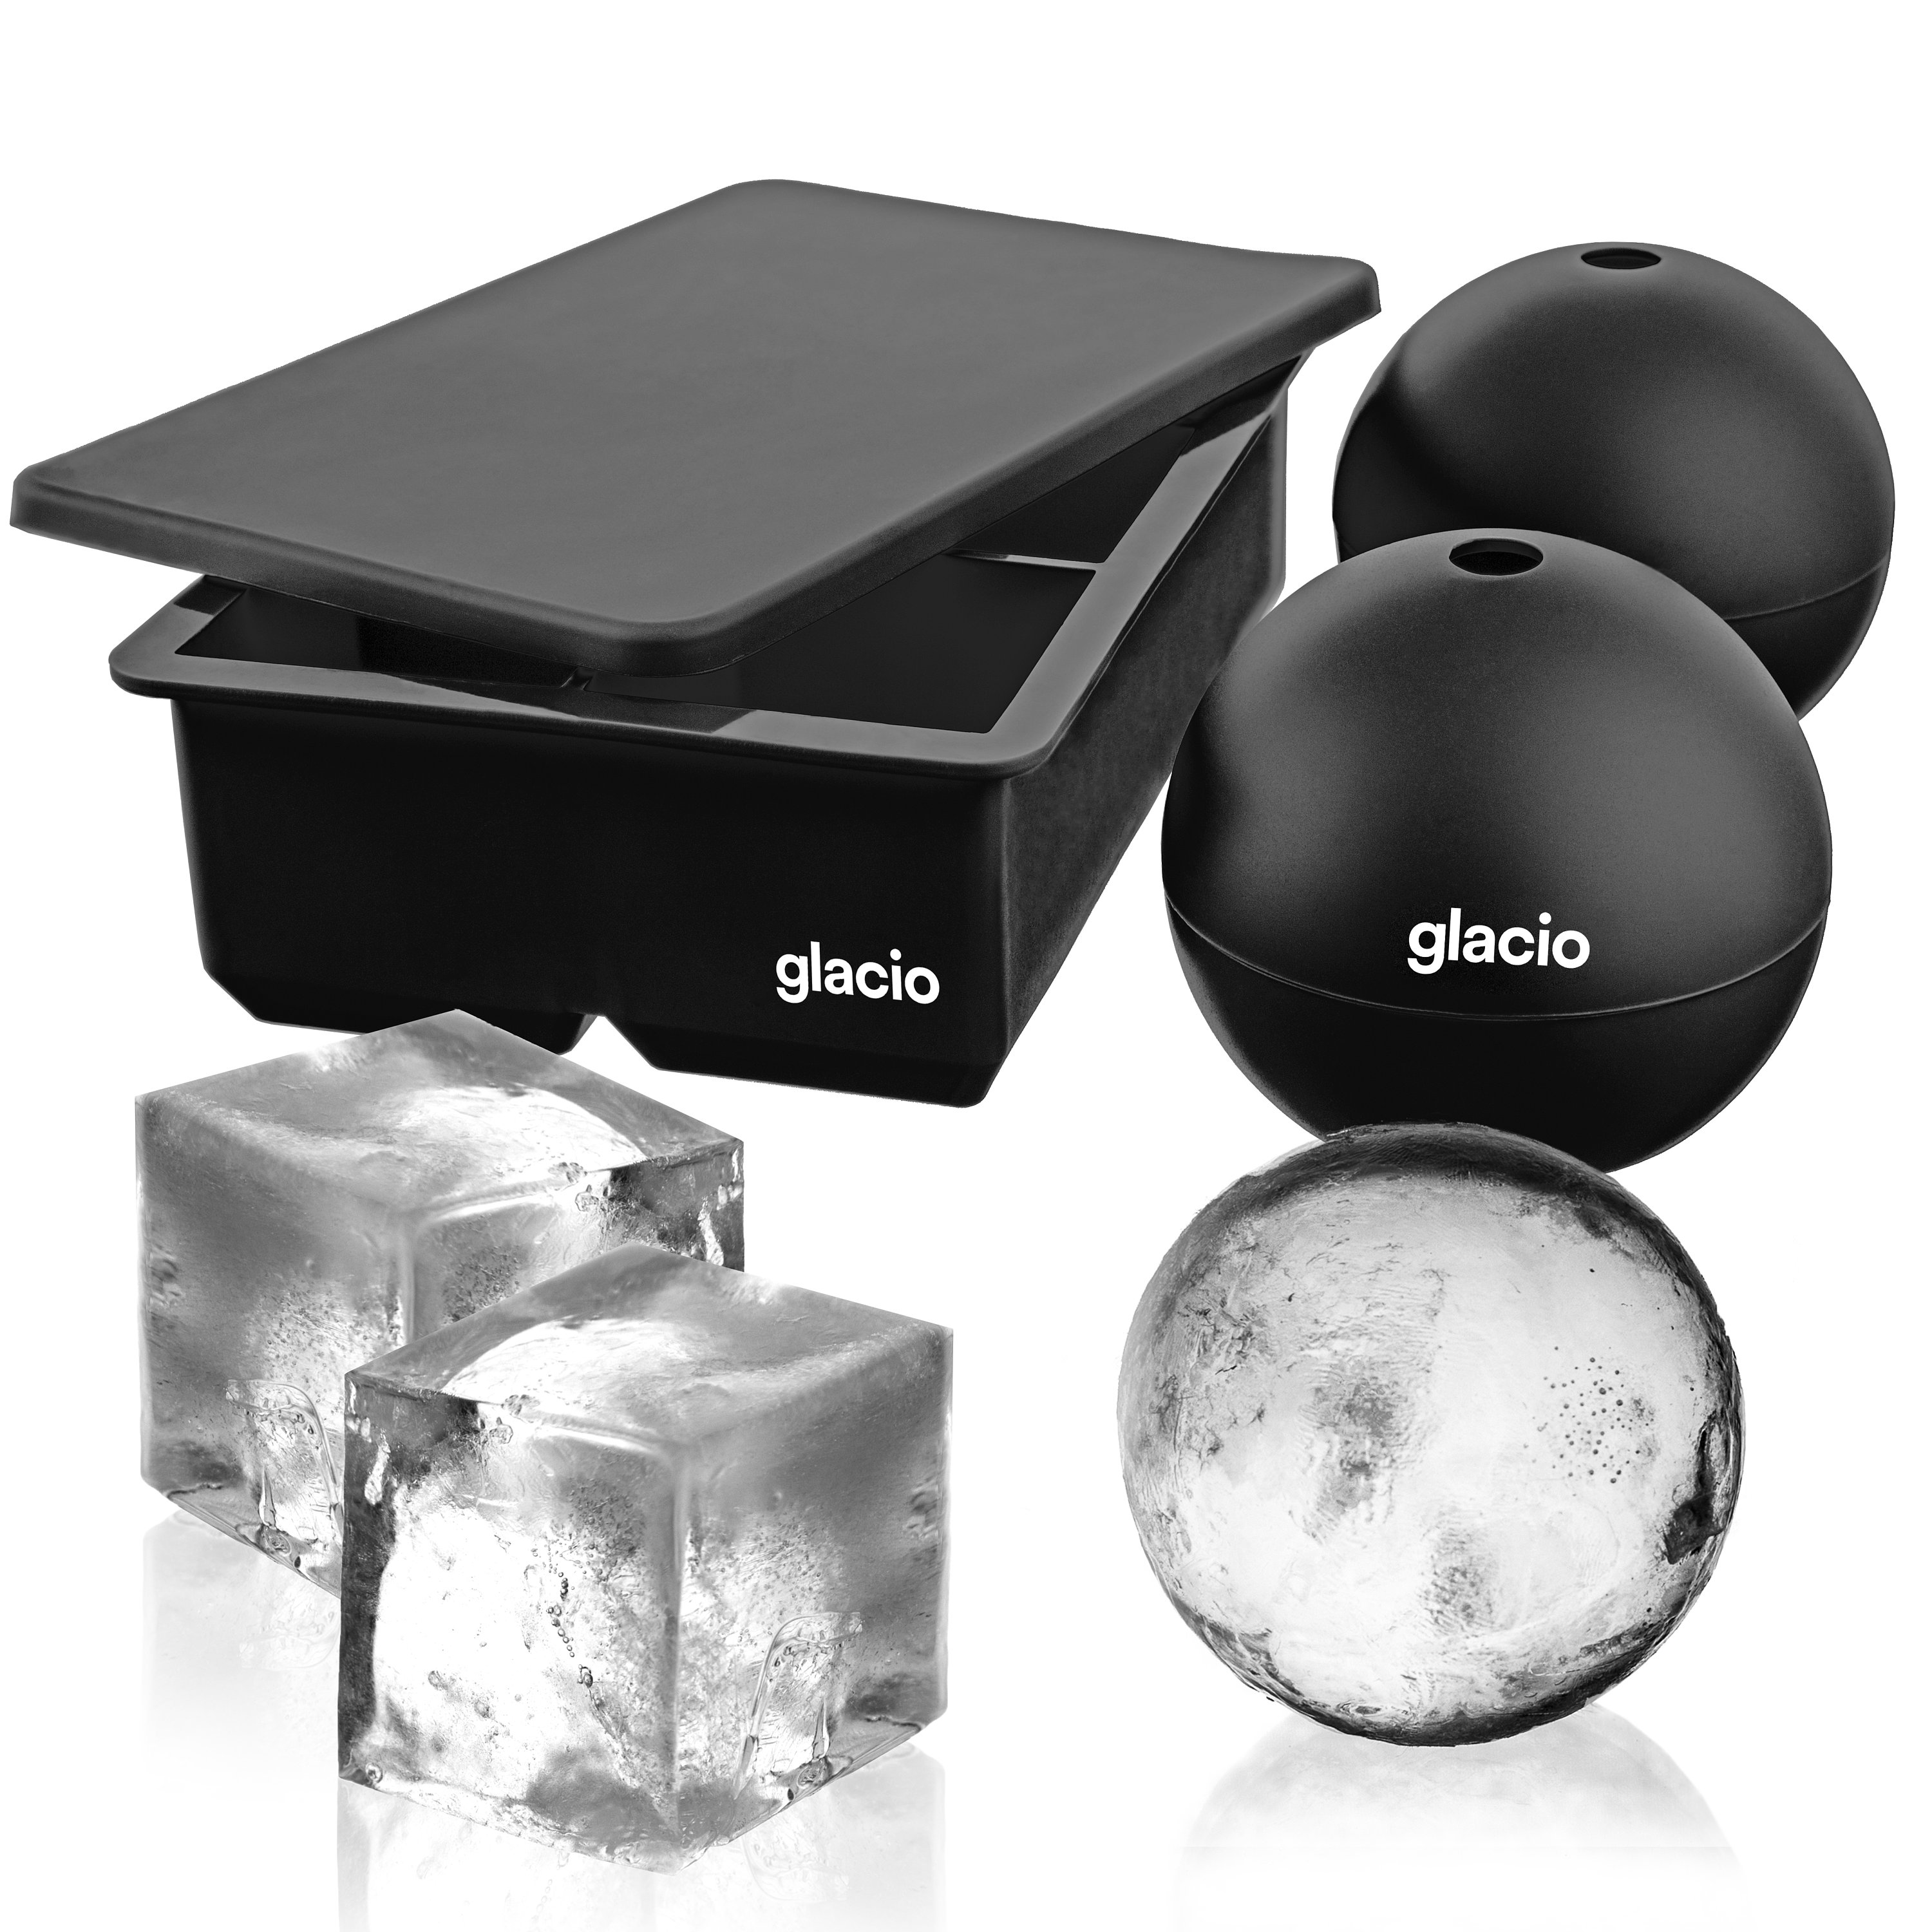 Glacio Large Sphere Ice Mold Tray - Whiskey Ice Sphere Maker - Makes 2.5 inch Ice Balls